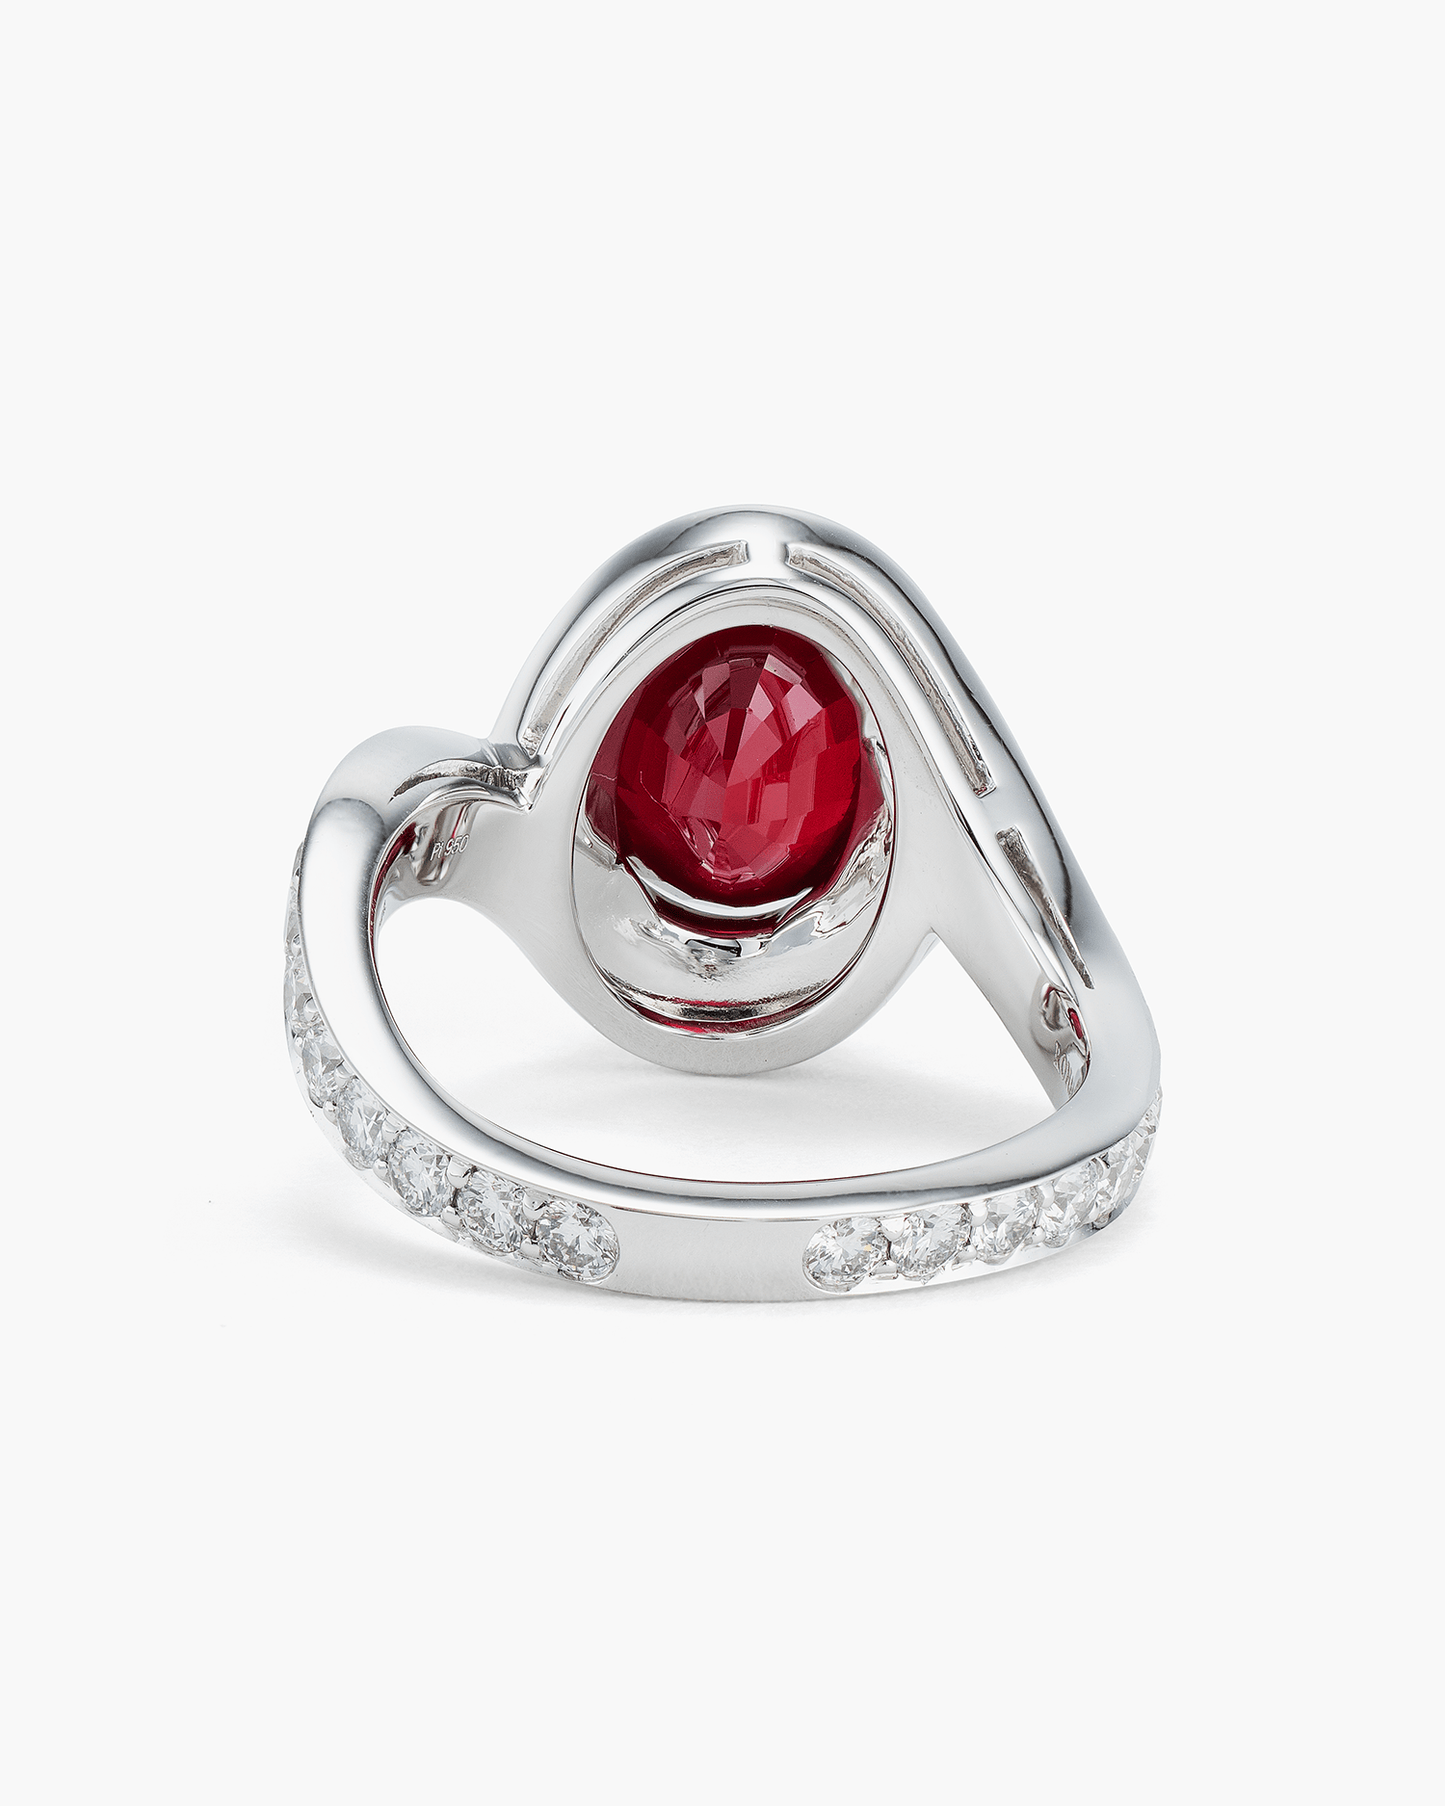 3.37 carat Oval Shape Mozambique Ruby and Diamond Ring